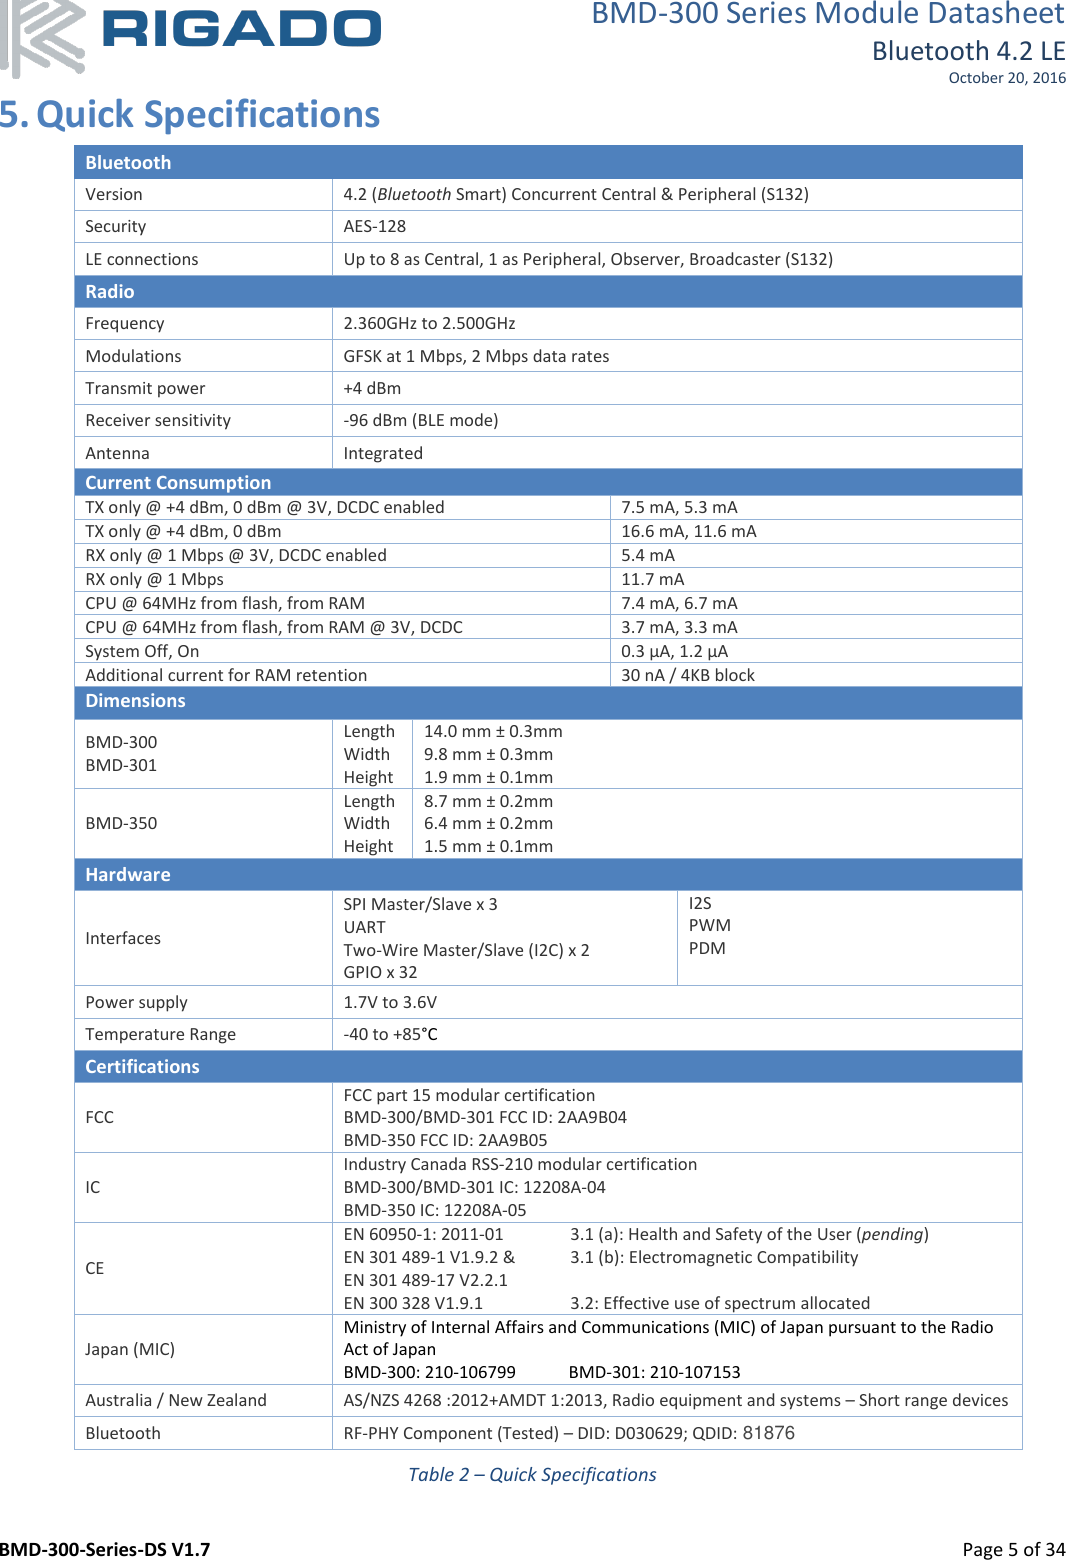 BMD-300 Series Module Datasheet Bluetooth 4.2 LE October 20, 2016 BMD-300-Series-DS V1.7         Page 5 of 34 5. Quick Specifications  Bluetooth Version 4.2 (Bluetooth Smart) Concurrent Central &amp; Peripheral (S132) Security AES-128 LE connections Up to 8 as Central, 1 as Peripheral, Observer, Broadcaster (S132) Radio Frequency 2.360GHz to 2.500GHz Modulations GFSK at 1 Mbps, 2 Mbps data rates Transmit power +4 dBm Receiver sensitivity -96 dBm (BLE mode) Antenna  Integrated Current Consumption TX only @ +4 dBm, 0 dBm @ 3V, DCDC enabled 7.5 mA, 5.3 mA TX only @ +4 dBm, 0 dBm 16.6 mA, 11.6 mA RX only @ 1 Mbps @ 3V, DCDC enabled 5.4 mA RX only @ 1 Mbps 11.7 mA CPU @ 64MHz from flash, from RAM 7.4 mA, 6.7 mA CPU @ 64MHz from flash, from RAM @ 3V, DCDC 3.7 mA, 3.3 mA System Off, On  0.3 µA, 1.2 µA Additional current for RAM retention 30 nA / 4KB block Dimensions BMD-300 BMD-301 Length Width Height 14.0 mm ± 0.3mm 9.8 mm ± 0.3mm 1.9 mm ± 0.1mm BMD-350 Length Width Height 8.7 mm ± 0.2mm 6.4 mm ± 0.2mm 1.5 mm ± 0.1mm Hardware Interfaces SPI Master/Slave x 3 UART Two-Wire Master/Slave (I2C) x 2 GPIO x 32 I2S PWM PDM  Power supply 1.7V to 3.6V Temperature Range -40 to +85°C Certifications FCC FCC part 15 modular certification BMD-300/BMD-301 FCC ID: 2AA9B04 BMD-350 FCC ID: 2AA9B05 IC Industry Canada RSS-210 modular certification BMD-300/BMD-301 IC: 12208A-04 BMD-350 IC: 12208A-05 CE EN 60950-1: 2011-01  3.1 (a): Health and Safety of the User (pending) EN 301 489-1 V1.9.2 &amp;  3.1 (b): Electromagnetic Compatibility EN 301 489-17 V2.2.1   EN 300 328 V1.9.1  3.2: Effective use of spectrum allocated Japan (MIC) Ministry of Internal Affairs and Communications (MIC) of Japan pursuant to the Radio Act of Japan BMD-300: 210-106799     BMD-301: 210-107153 Australia / New Zealand AS/NZS 4268 :2012+AMDT 1:2013, Radio equipment and systems – Short range devices Bluetooth RF-PHY Component (Tested) – DID: D030629; QDID: 81876 Table 2 – Quick Specifications 